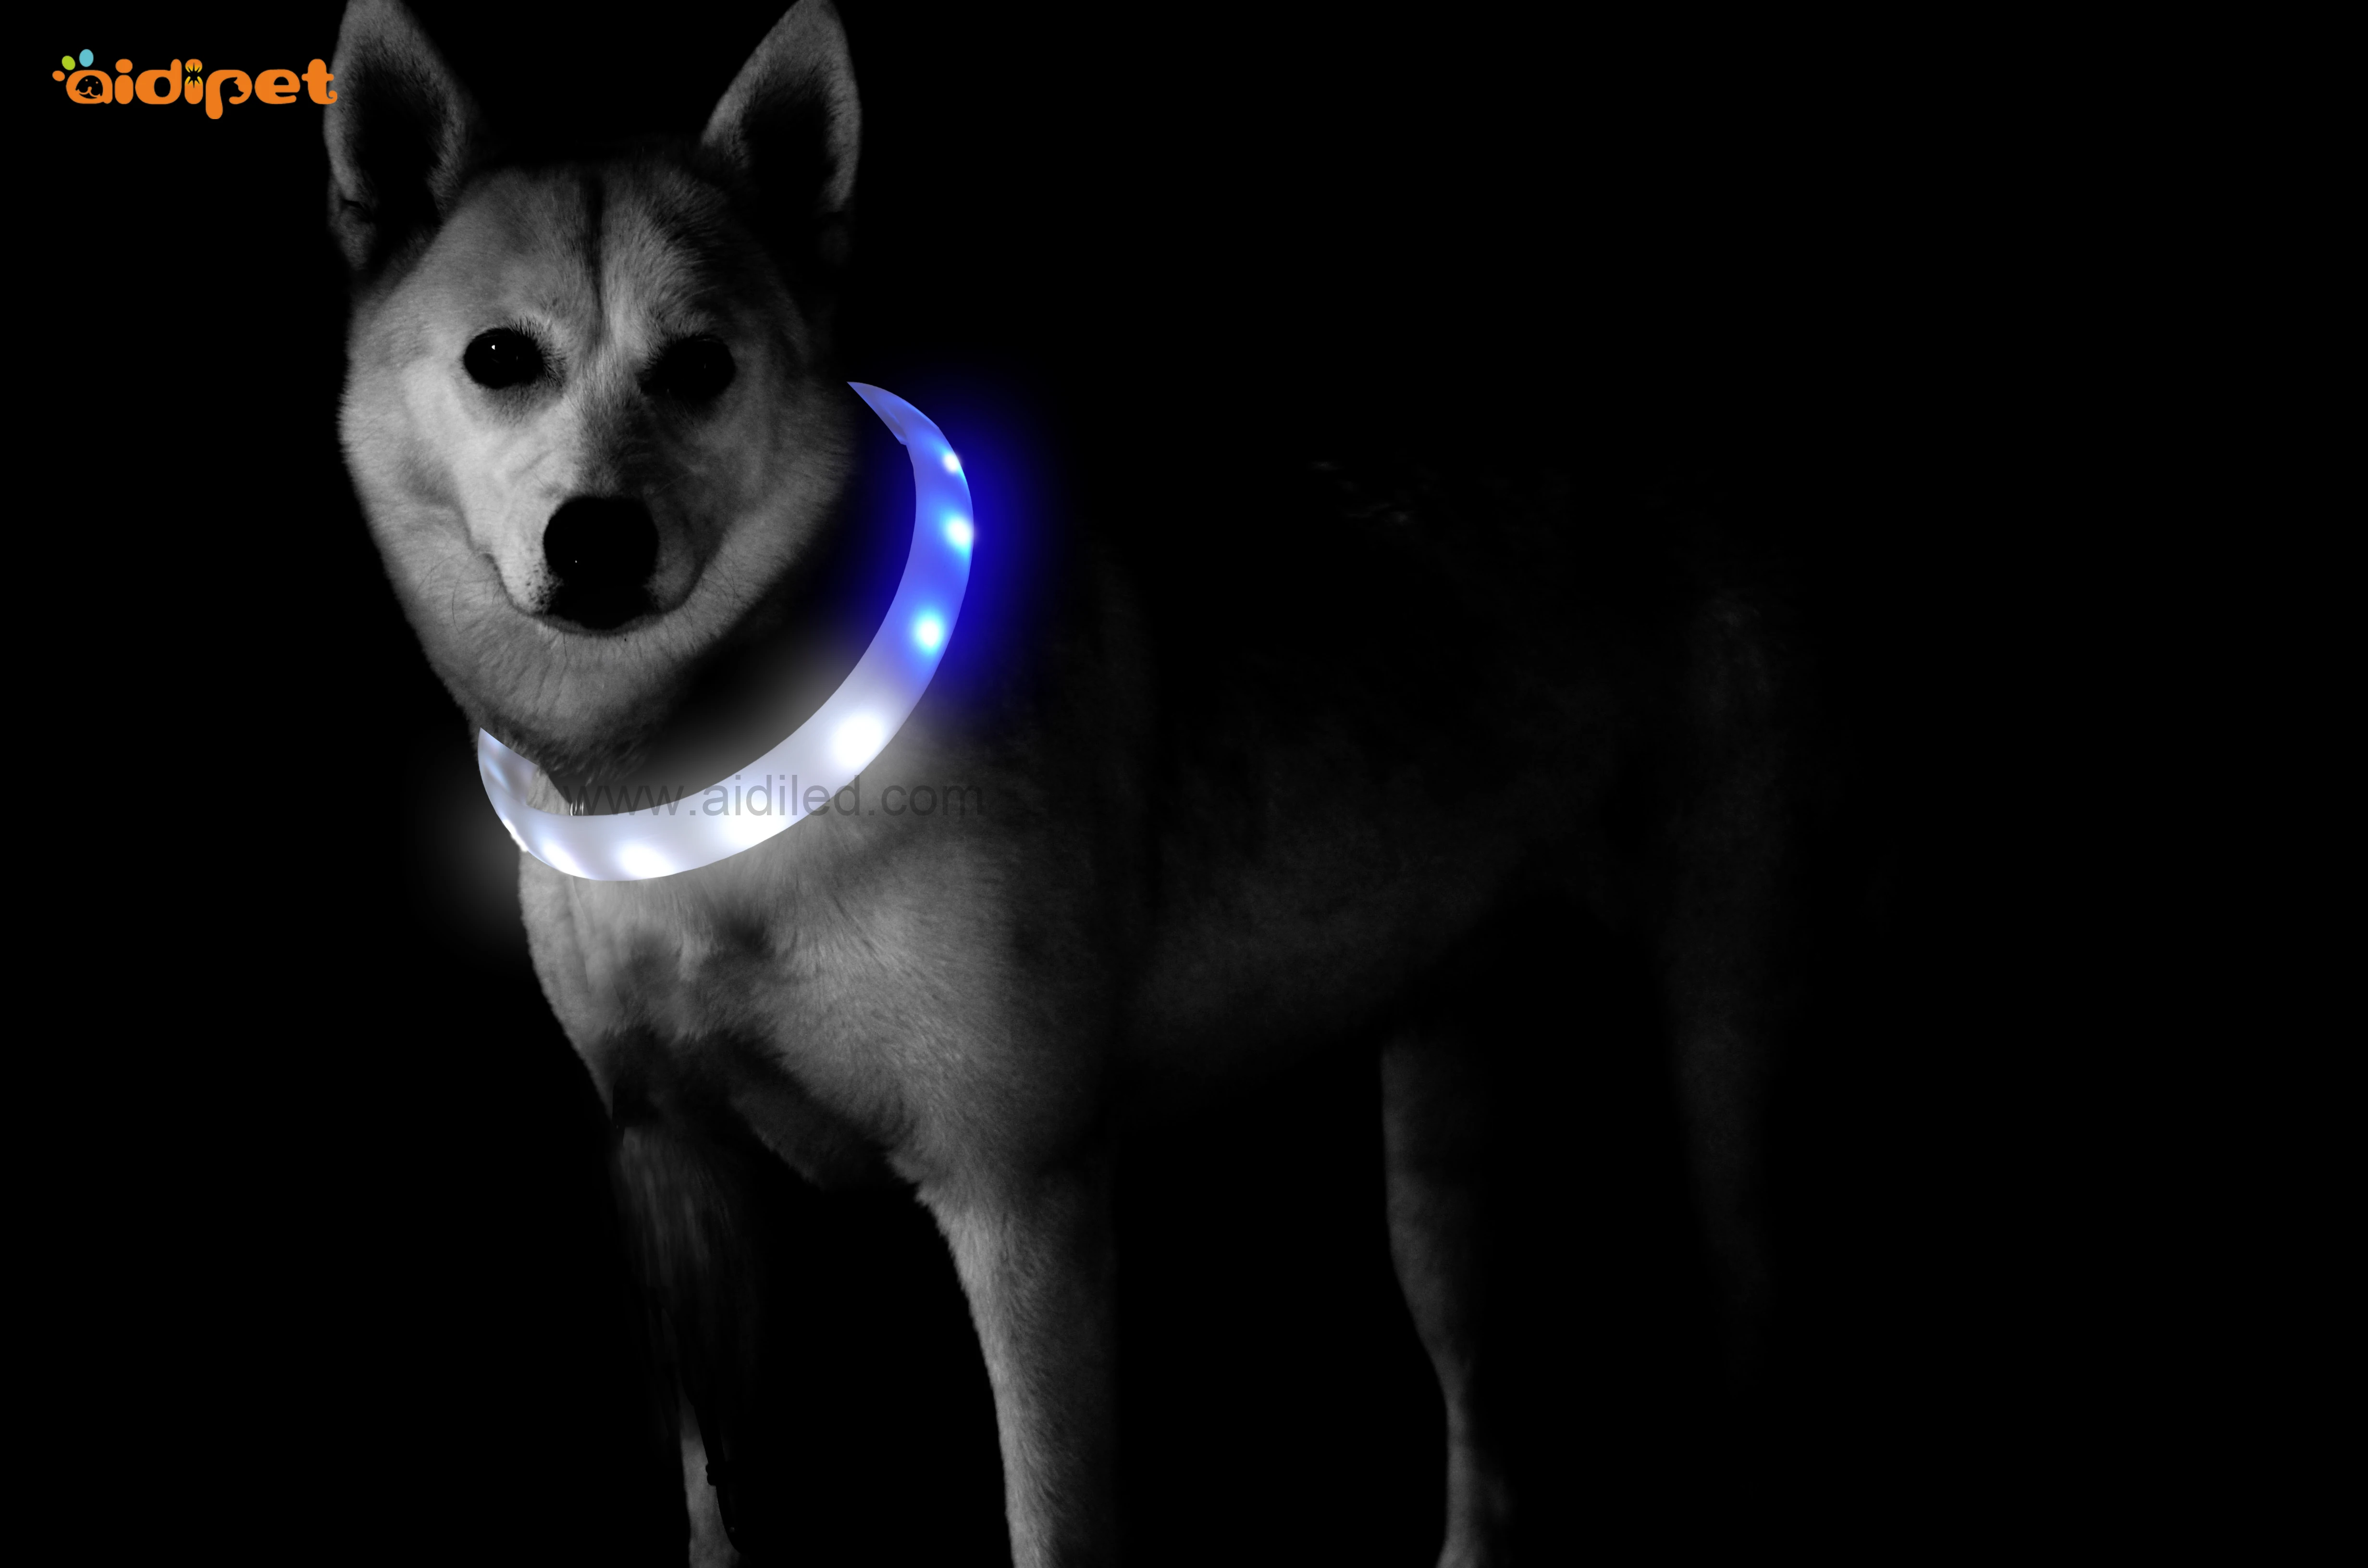 RGB Led DogCollar Large Battery Capacity Coloful Shining Collar for Dogs Free Size to Cut USB Rechargeable